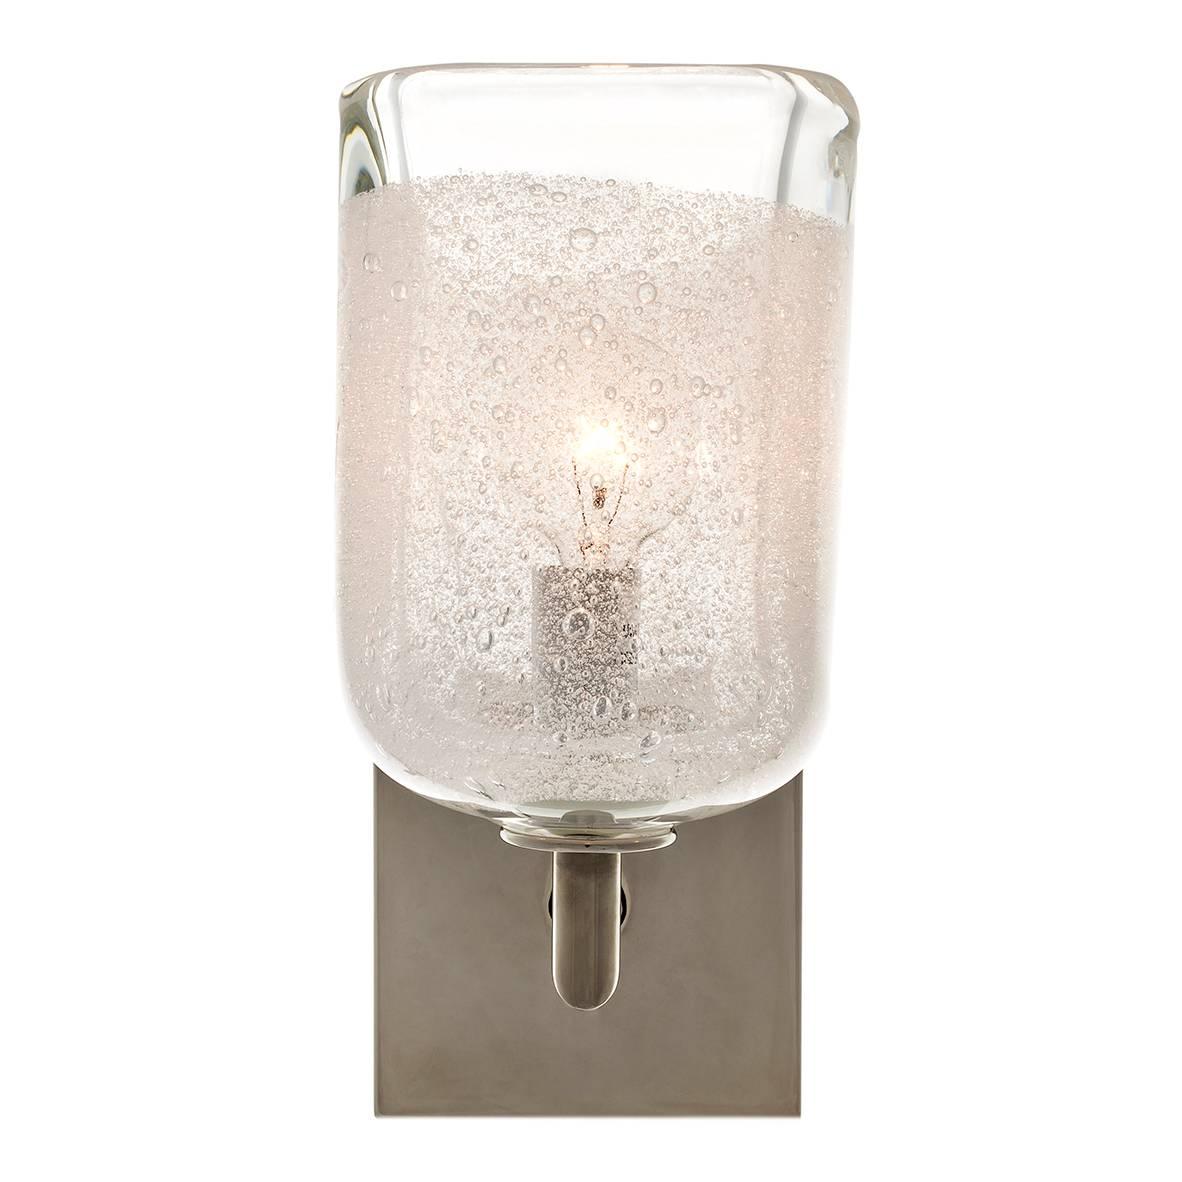 Clear Square Bubble Glass Shown with Satin Nickel Finish • Hand Blown Glass • Made in USA
Various Hardware Finishes Available.

This series of wall sconces is classically inspired. Scaled versions of our pendants extend from elegant metal armatures.